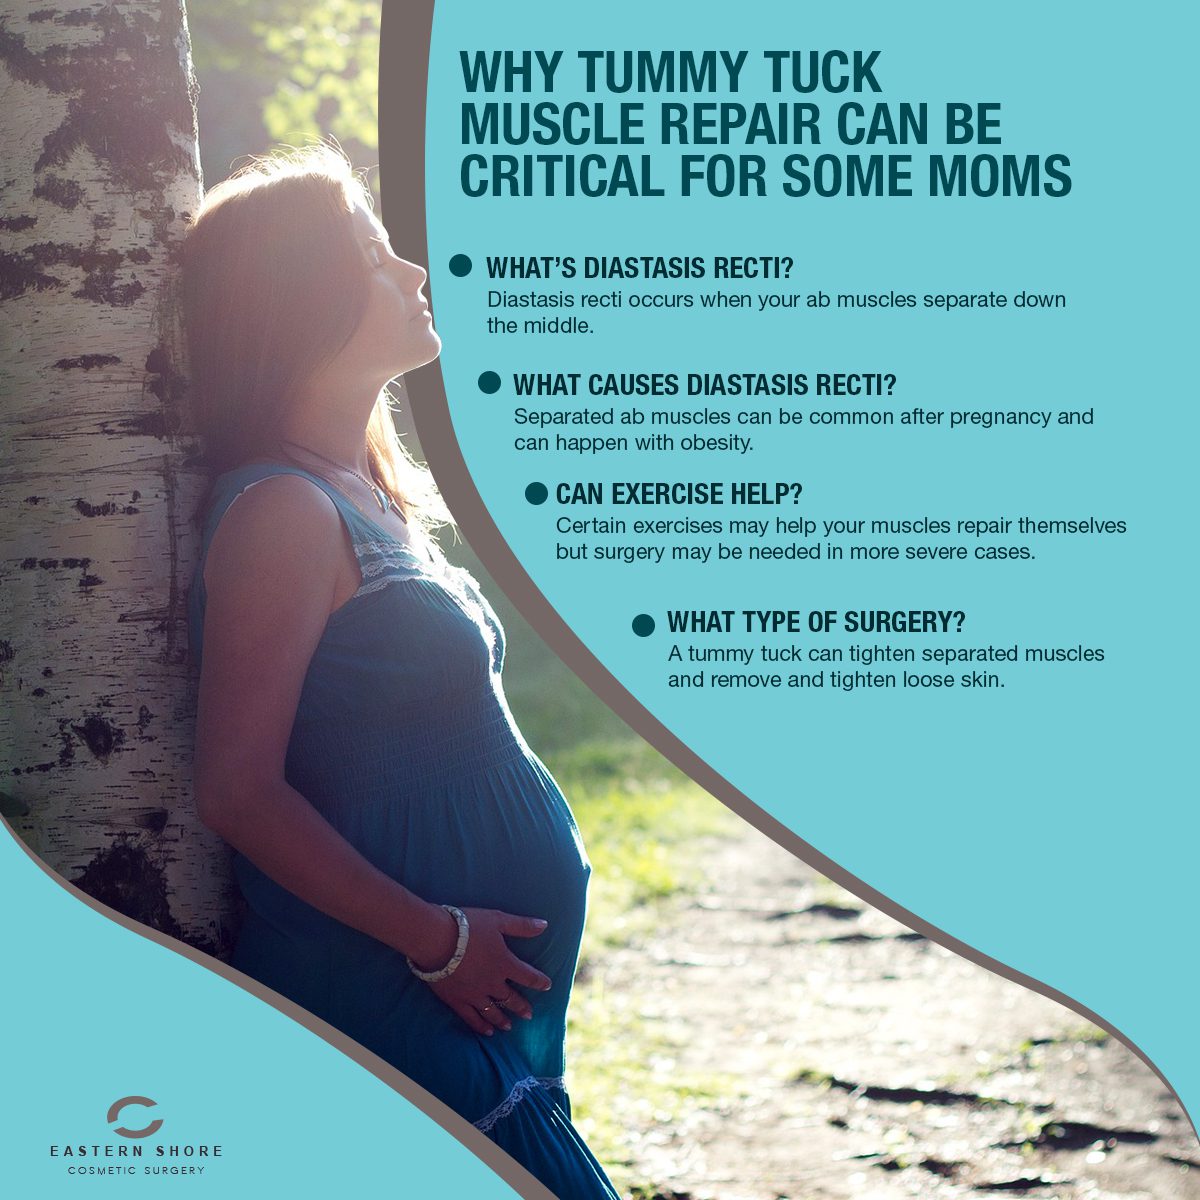 Why Tummy Tuck Muscle Repair Can Be Critical For Some Moms [Infographic] img 1